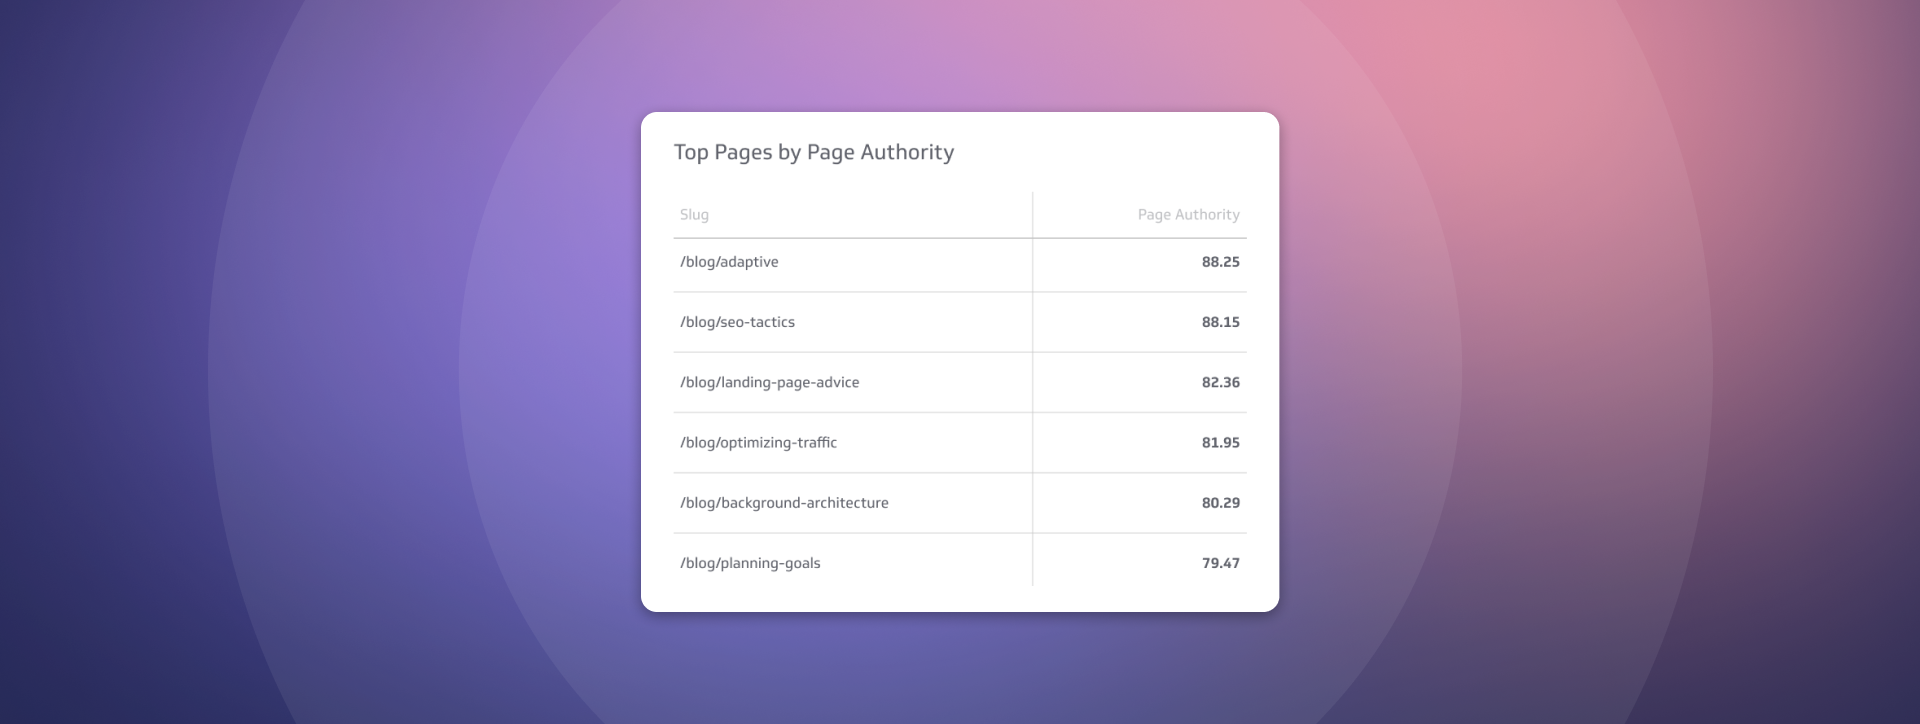 Top Pages Page Authority